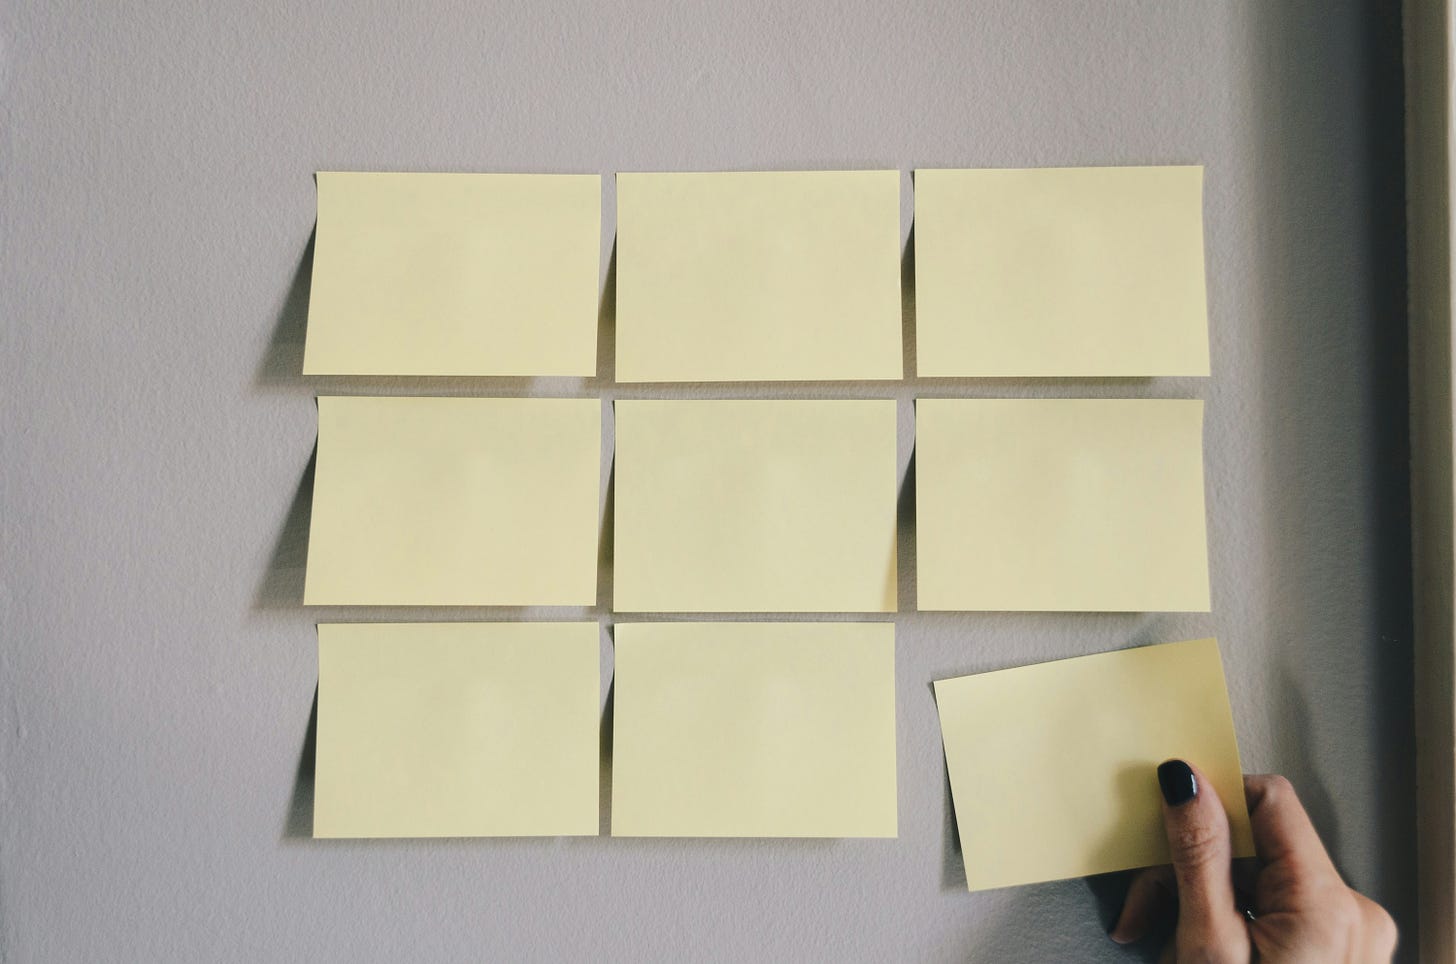 Several post-it papers on a wall and a hand with black nails that picks one